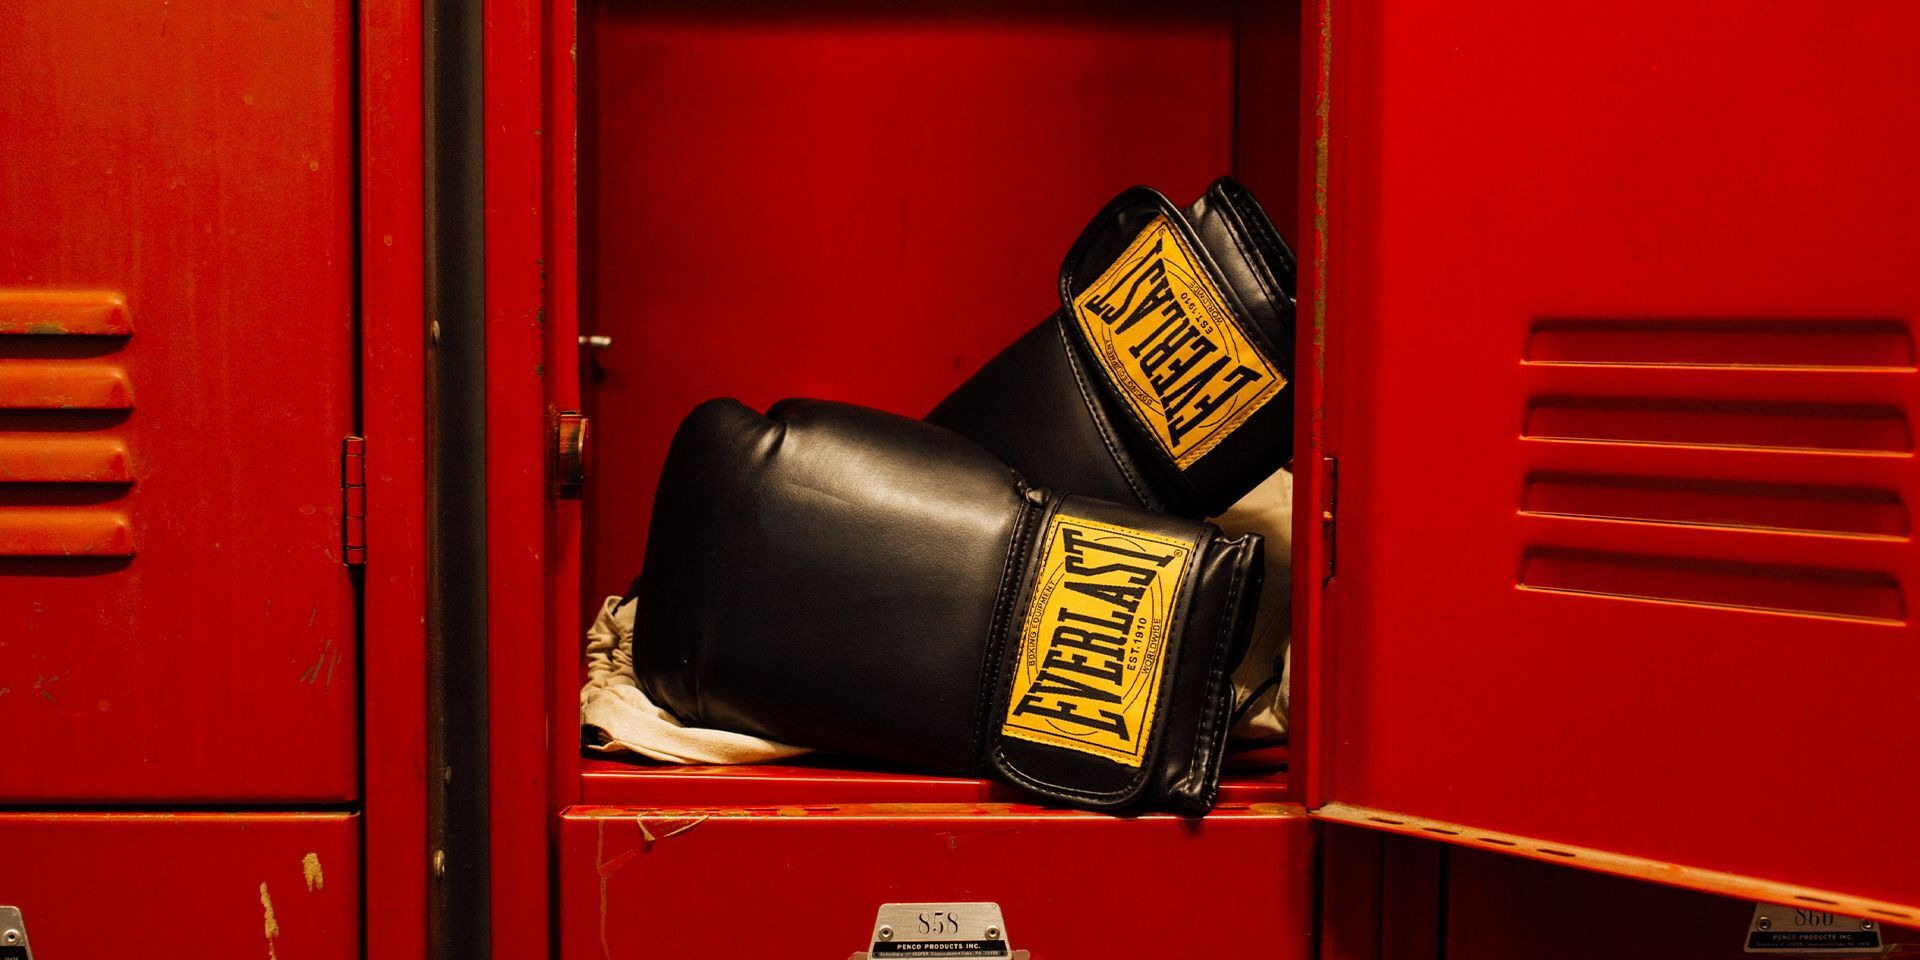 Find your Everlast boxing glove size